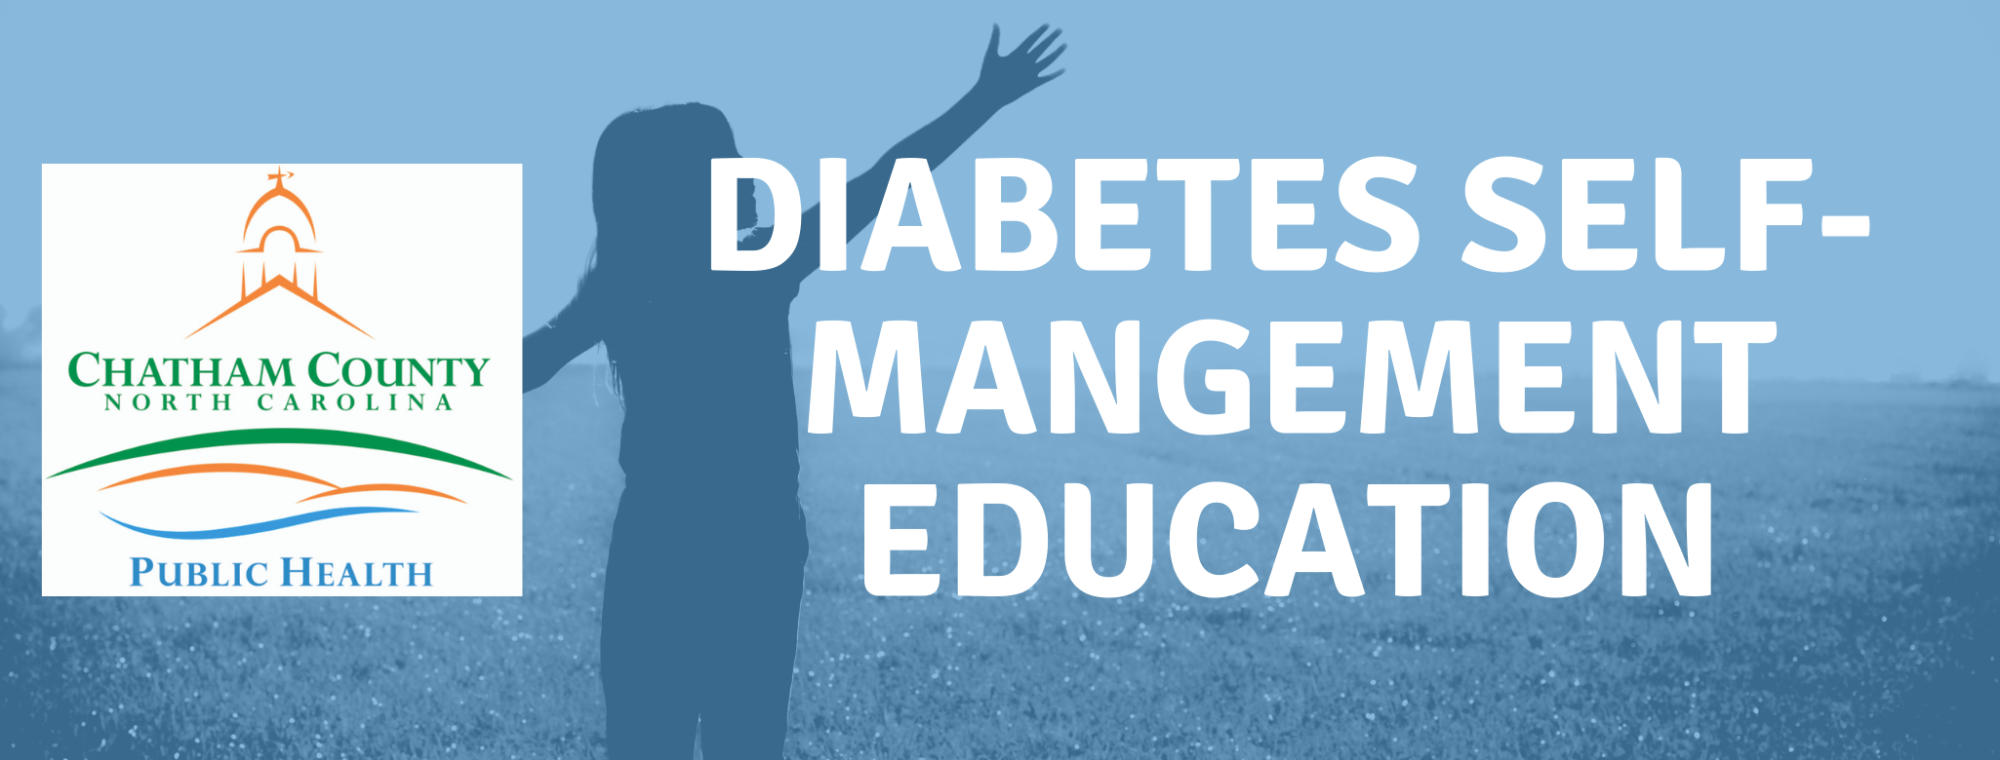 Take Charge of Your Diabetes: Benefits and Guide to Diabetes Self-Management Programs